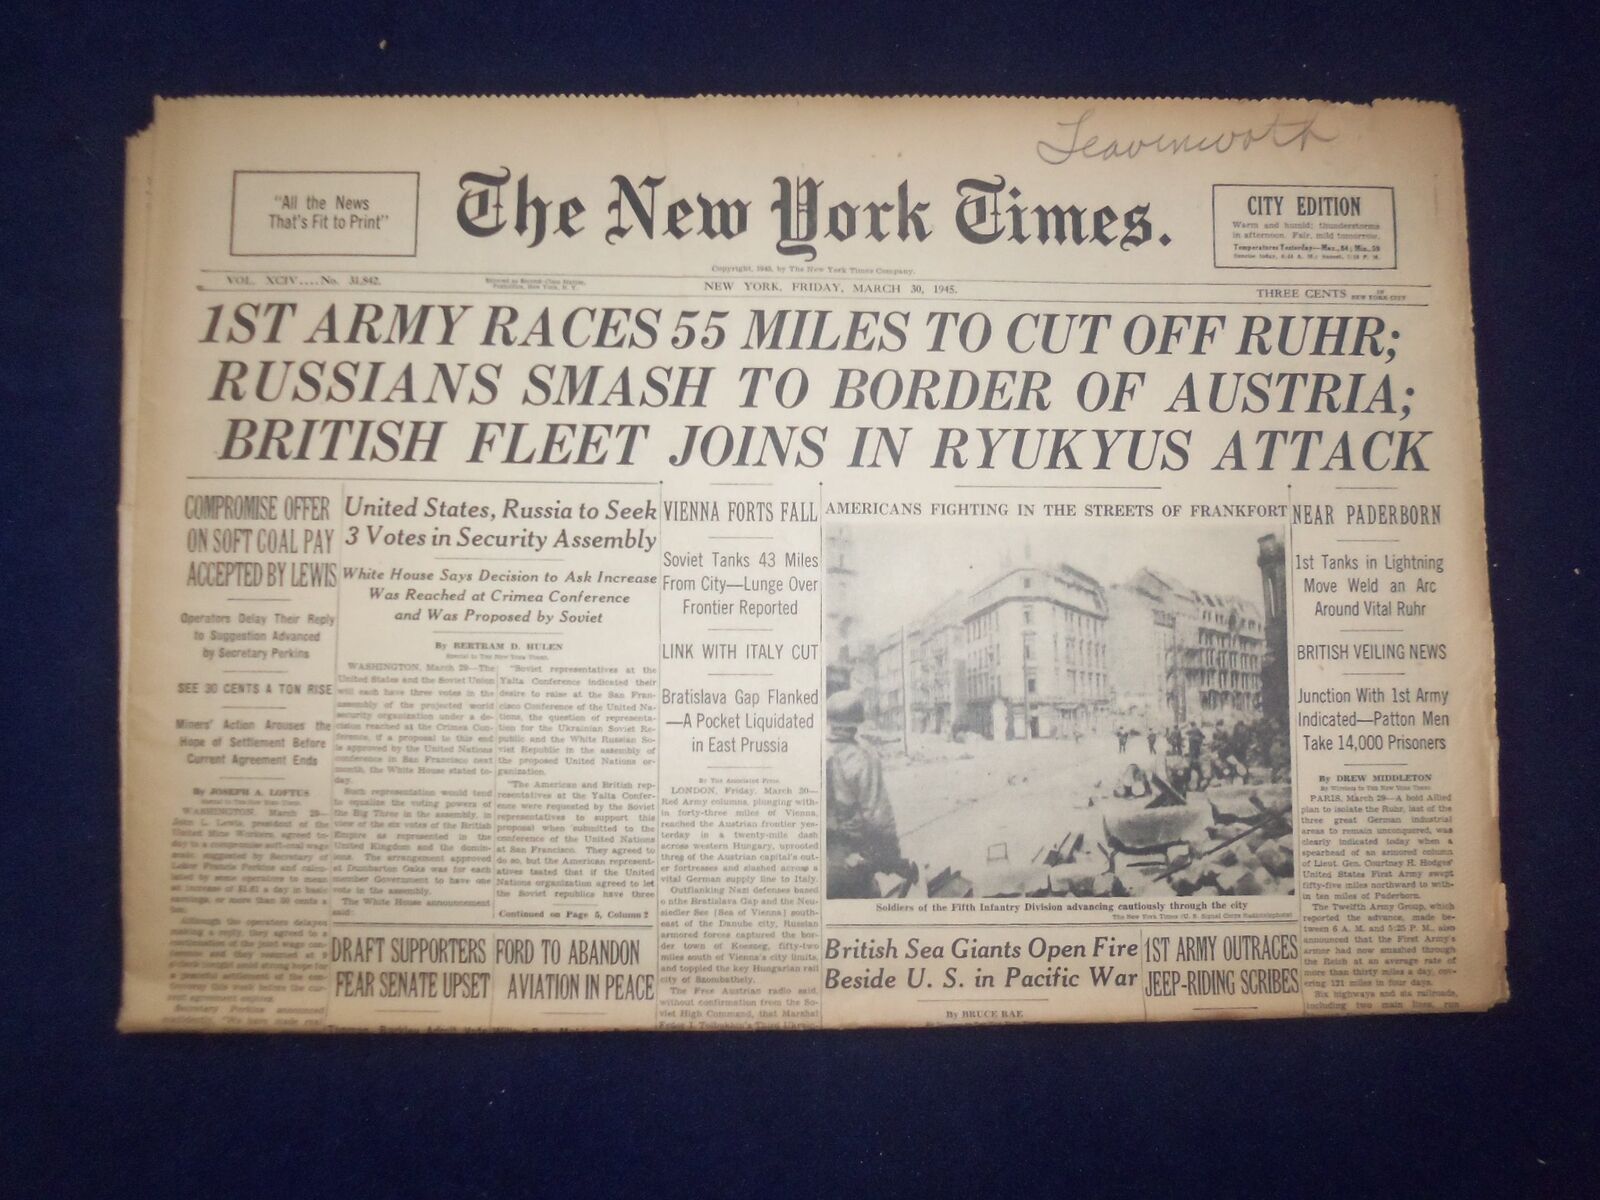 1945 MARCH 30 NEW YORK TIMES - 1ST ARMY RACES 55 MILES TO CUT OFF RUHR - NP 6681